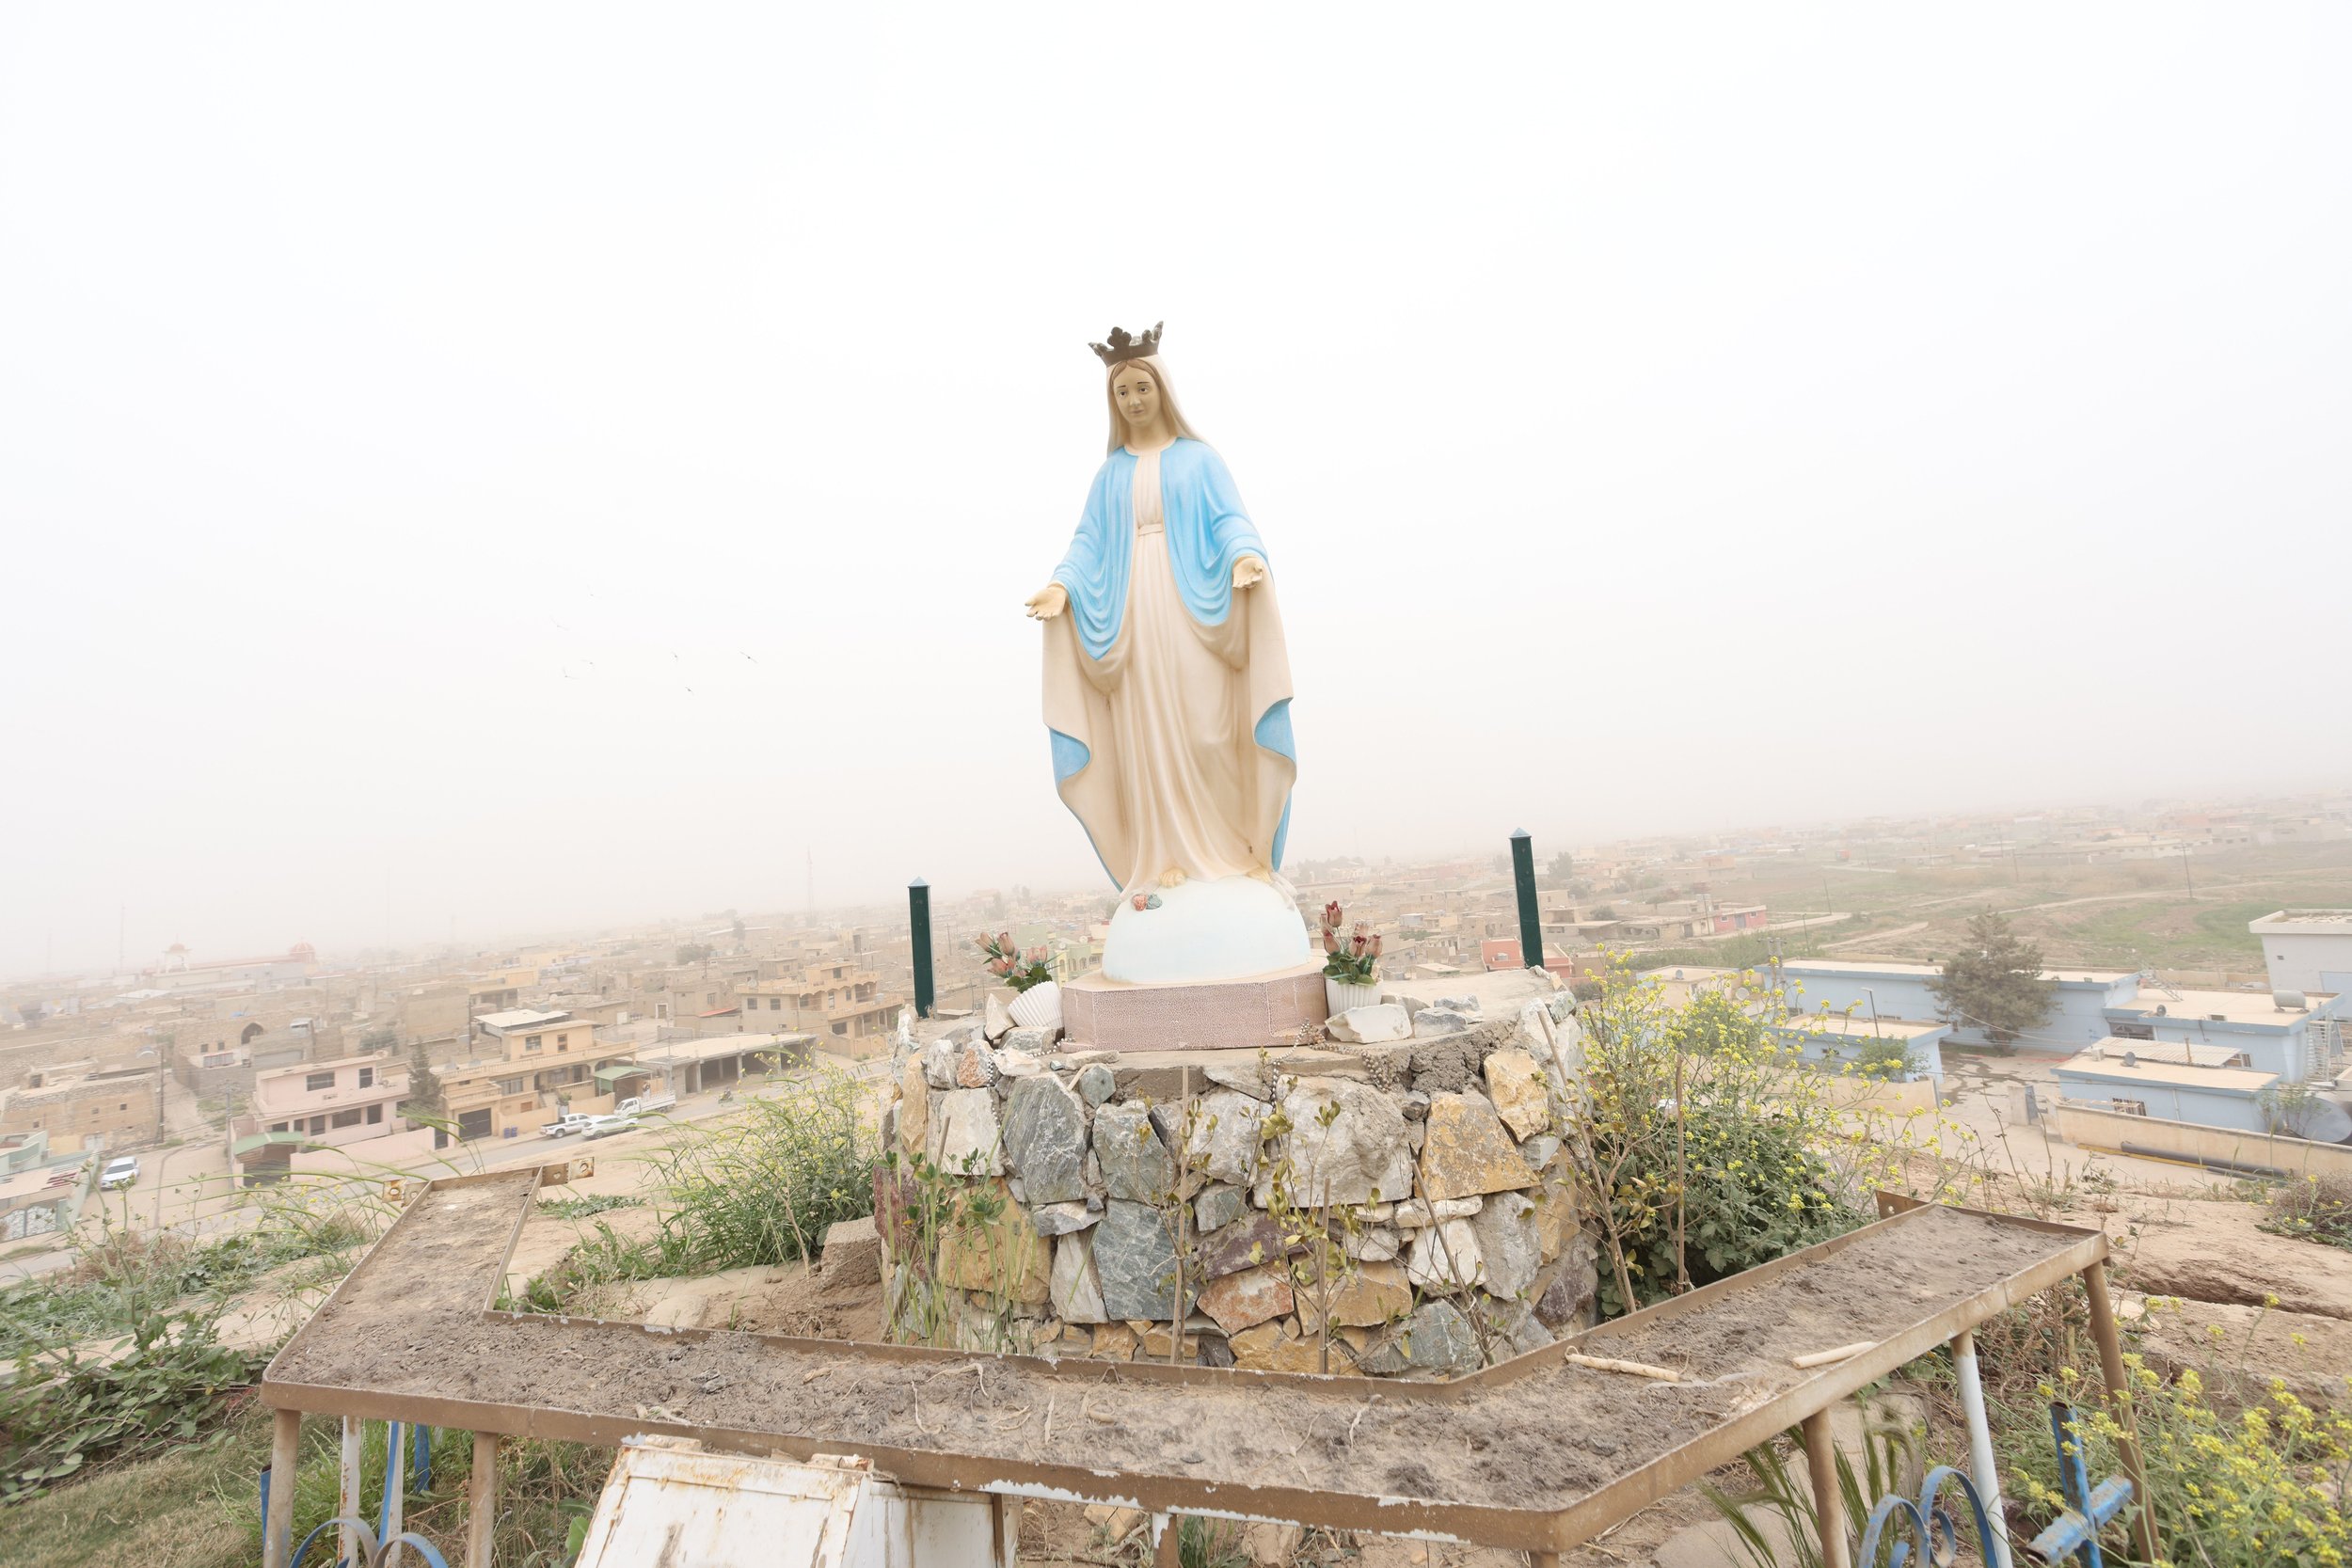  The statue of the Virgin Mary stands on the hill the village is named for; Tesqopa means “hill of the cross” or “rising hill.”  